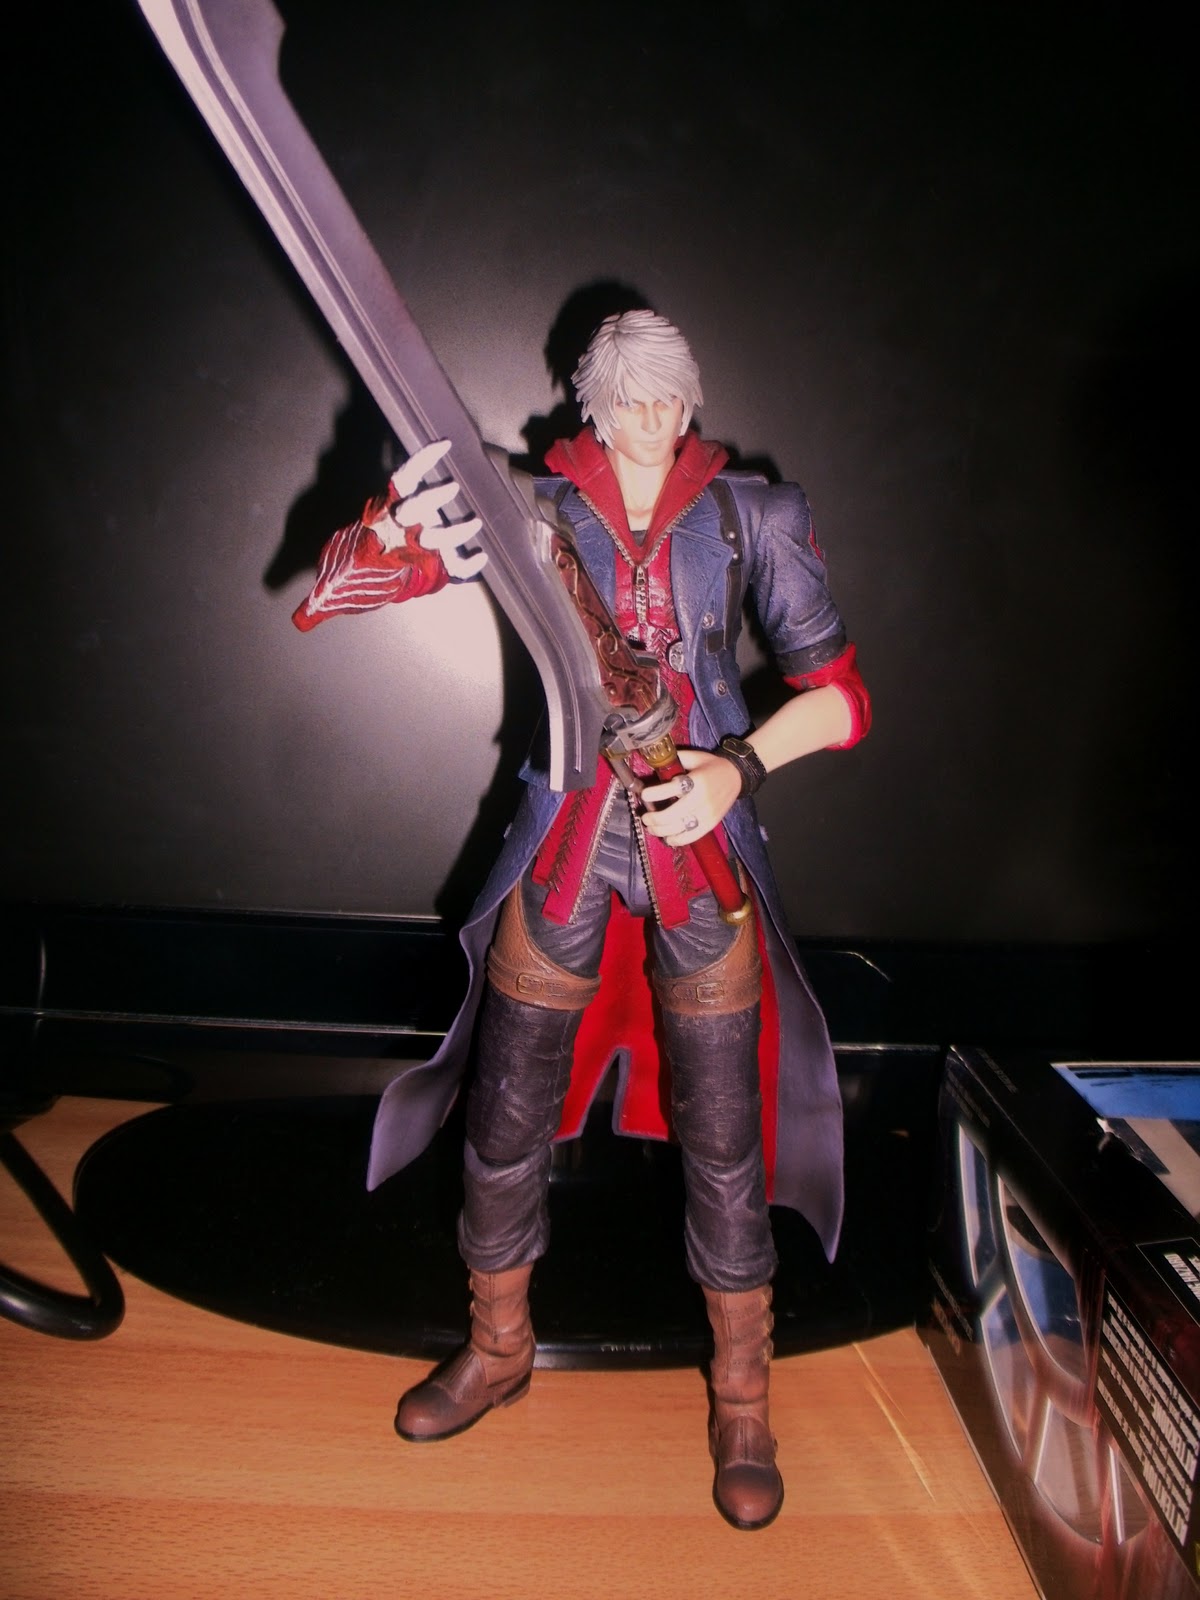 Angels and Summer: Play Arts Kai Dante - Devil May Cry 4 Review